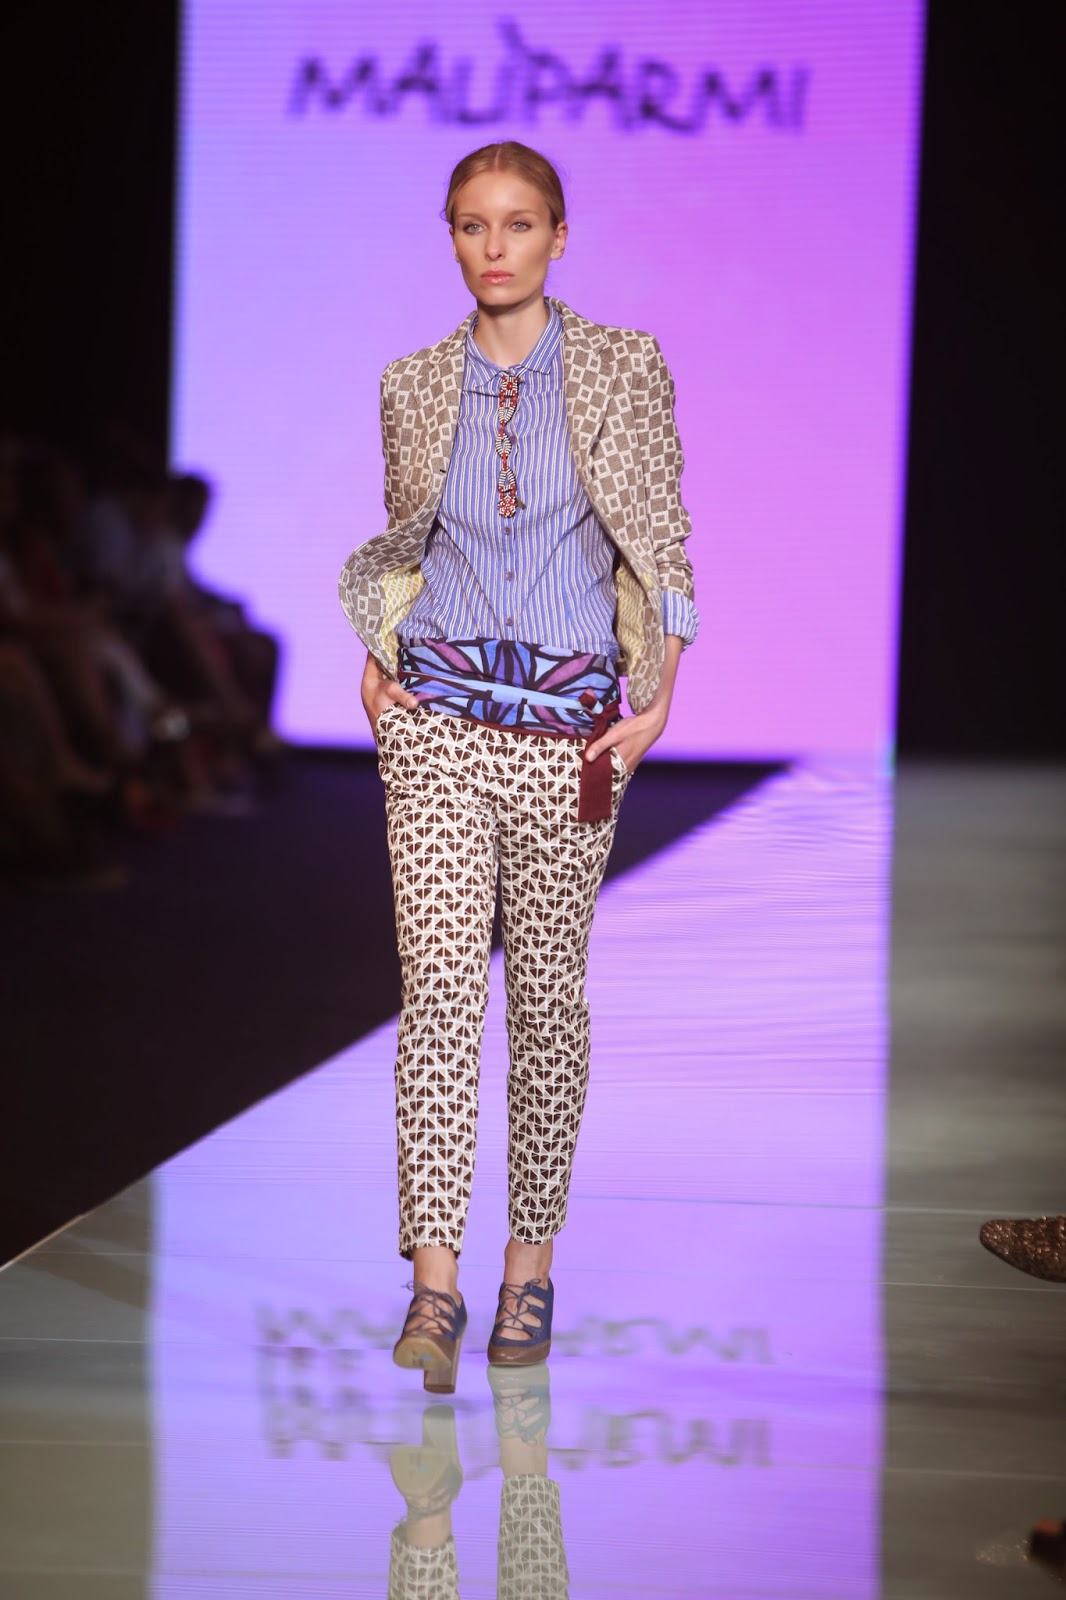 Miami Fashion Week 2014: Maliparmi, “being yourself is the key to this collection.”